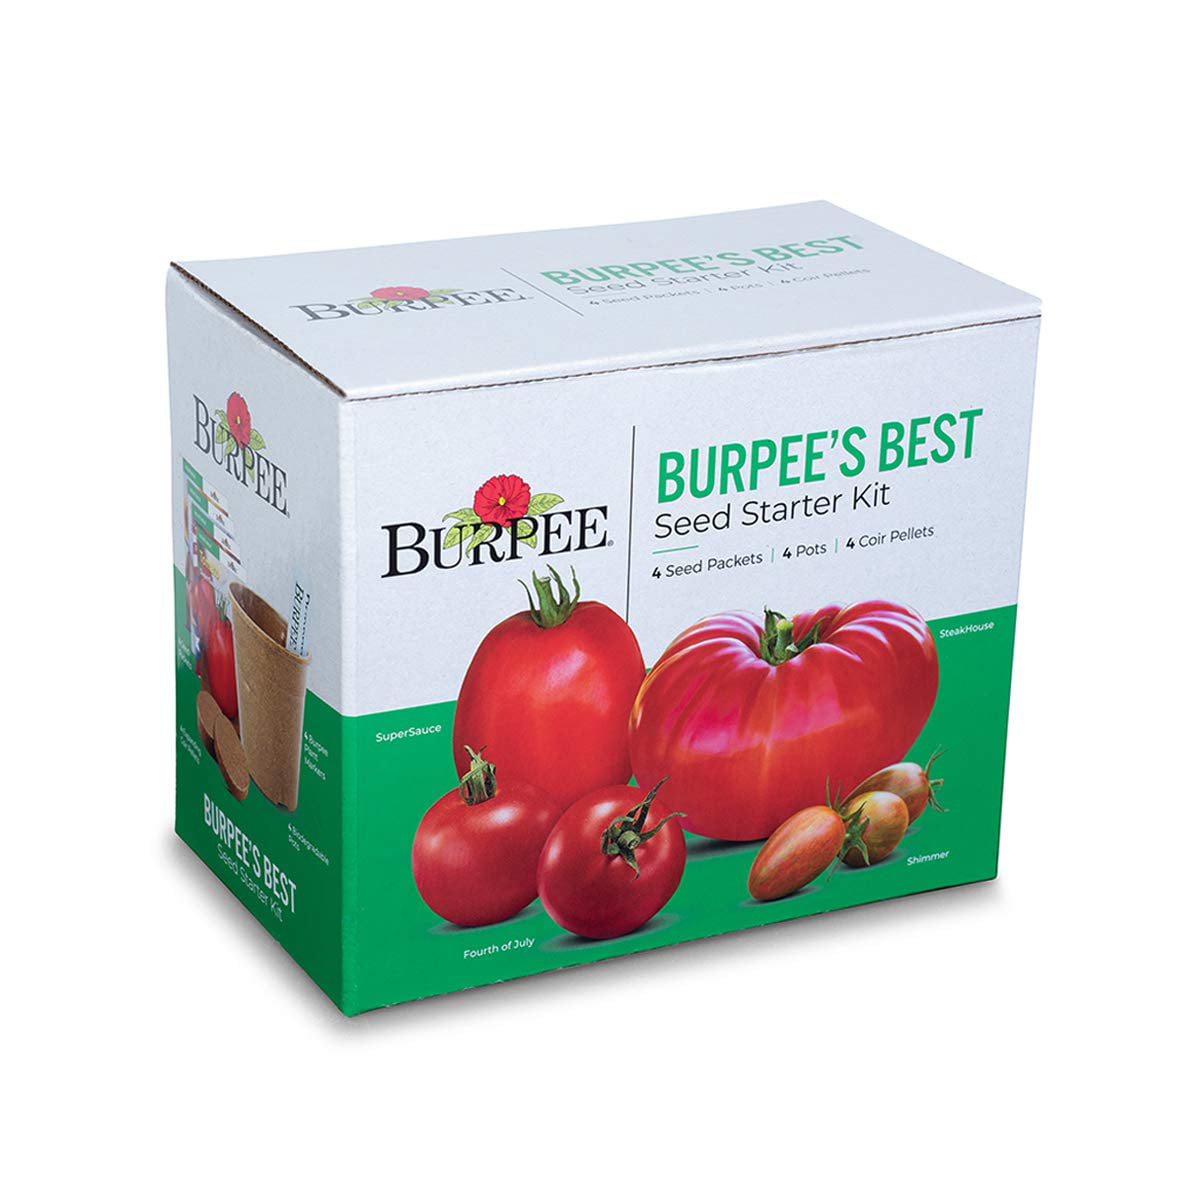 Burpee Best Starter Kit | SuperSauce, Fourth of July, Shimmer & Steakhouse | 4 Tomato Seed Packets, 4 4 Coir Pellets & Markers - Walmart.com